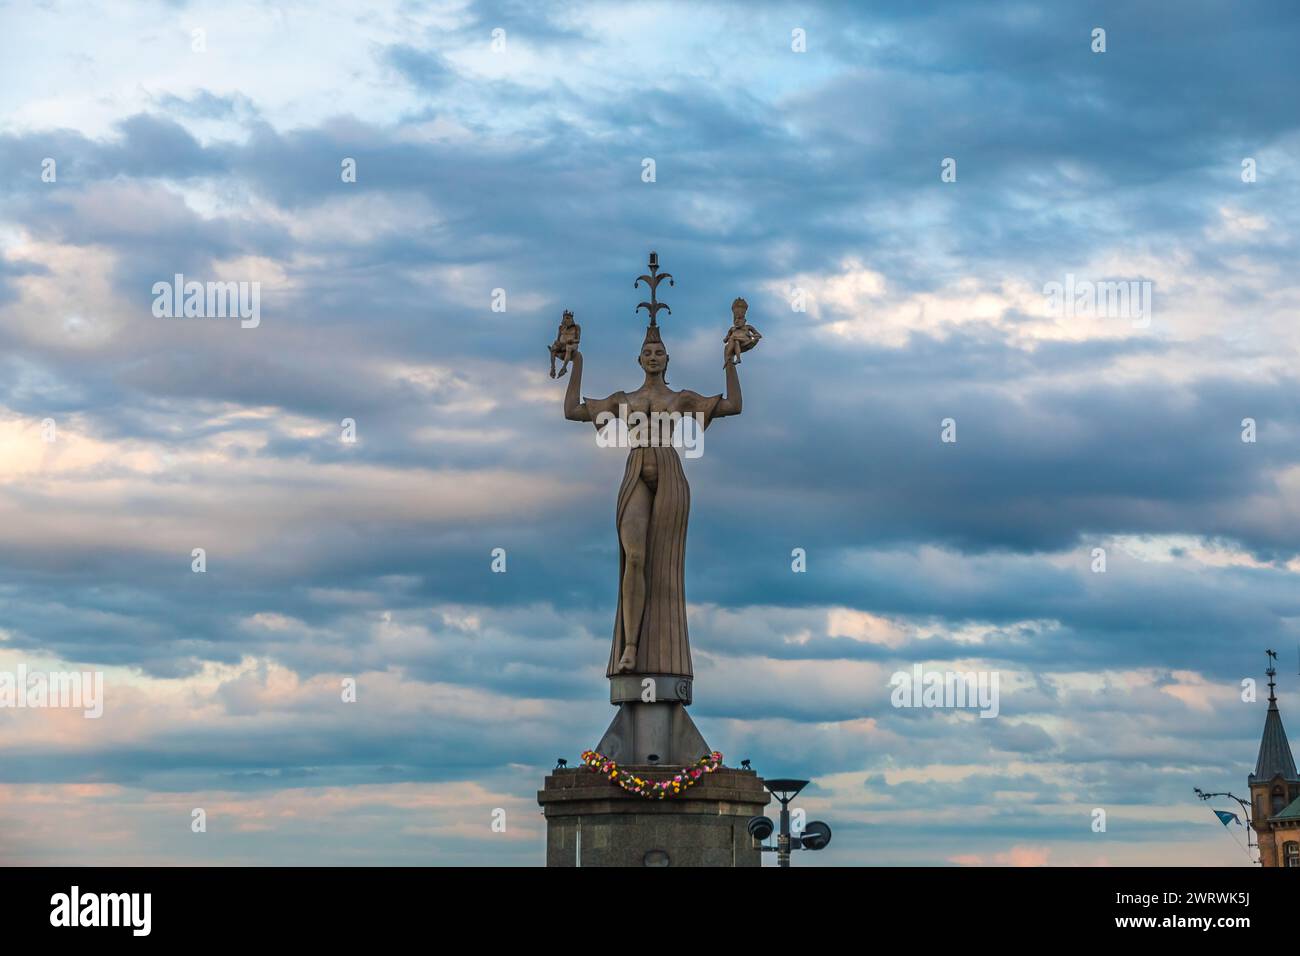 Beautiful close-up view of the famous Imperia statue at the harbour entrance of Constance (Konstanz) by Lake Constance (Bodensee) in Germany on a nice... Stock Photo